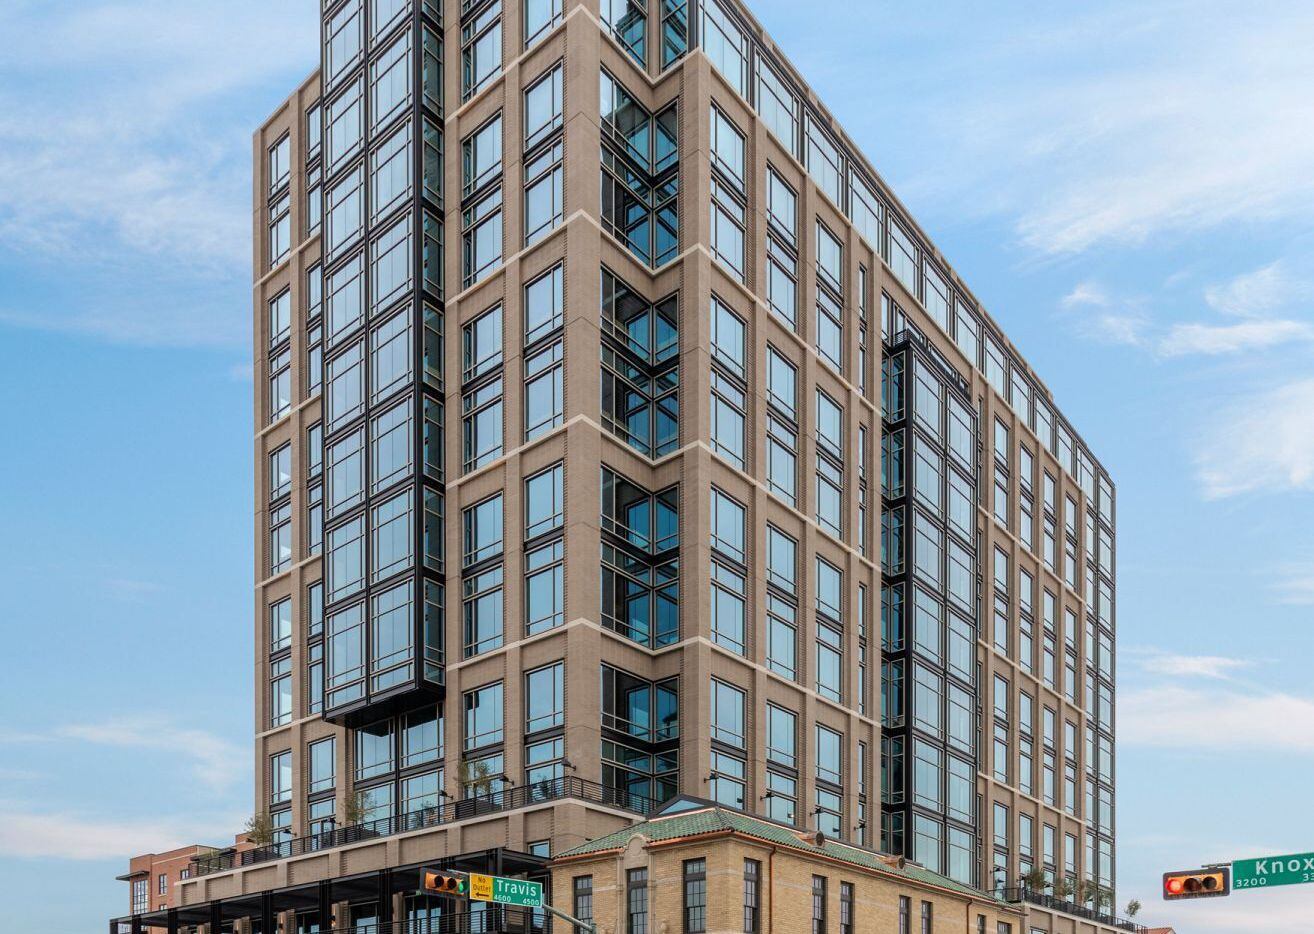 Leasing at the new Weir's Plaza tower at Knox and Travis streets helped boost first-quarter...